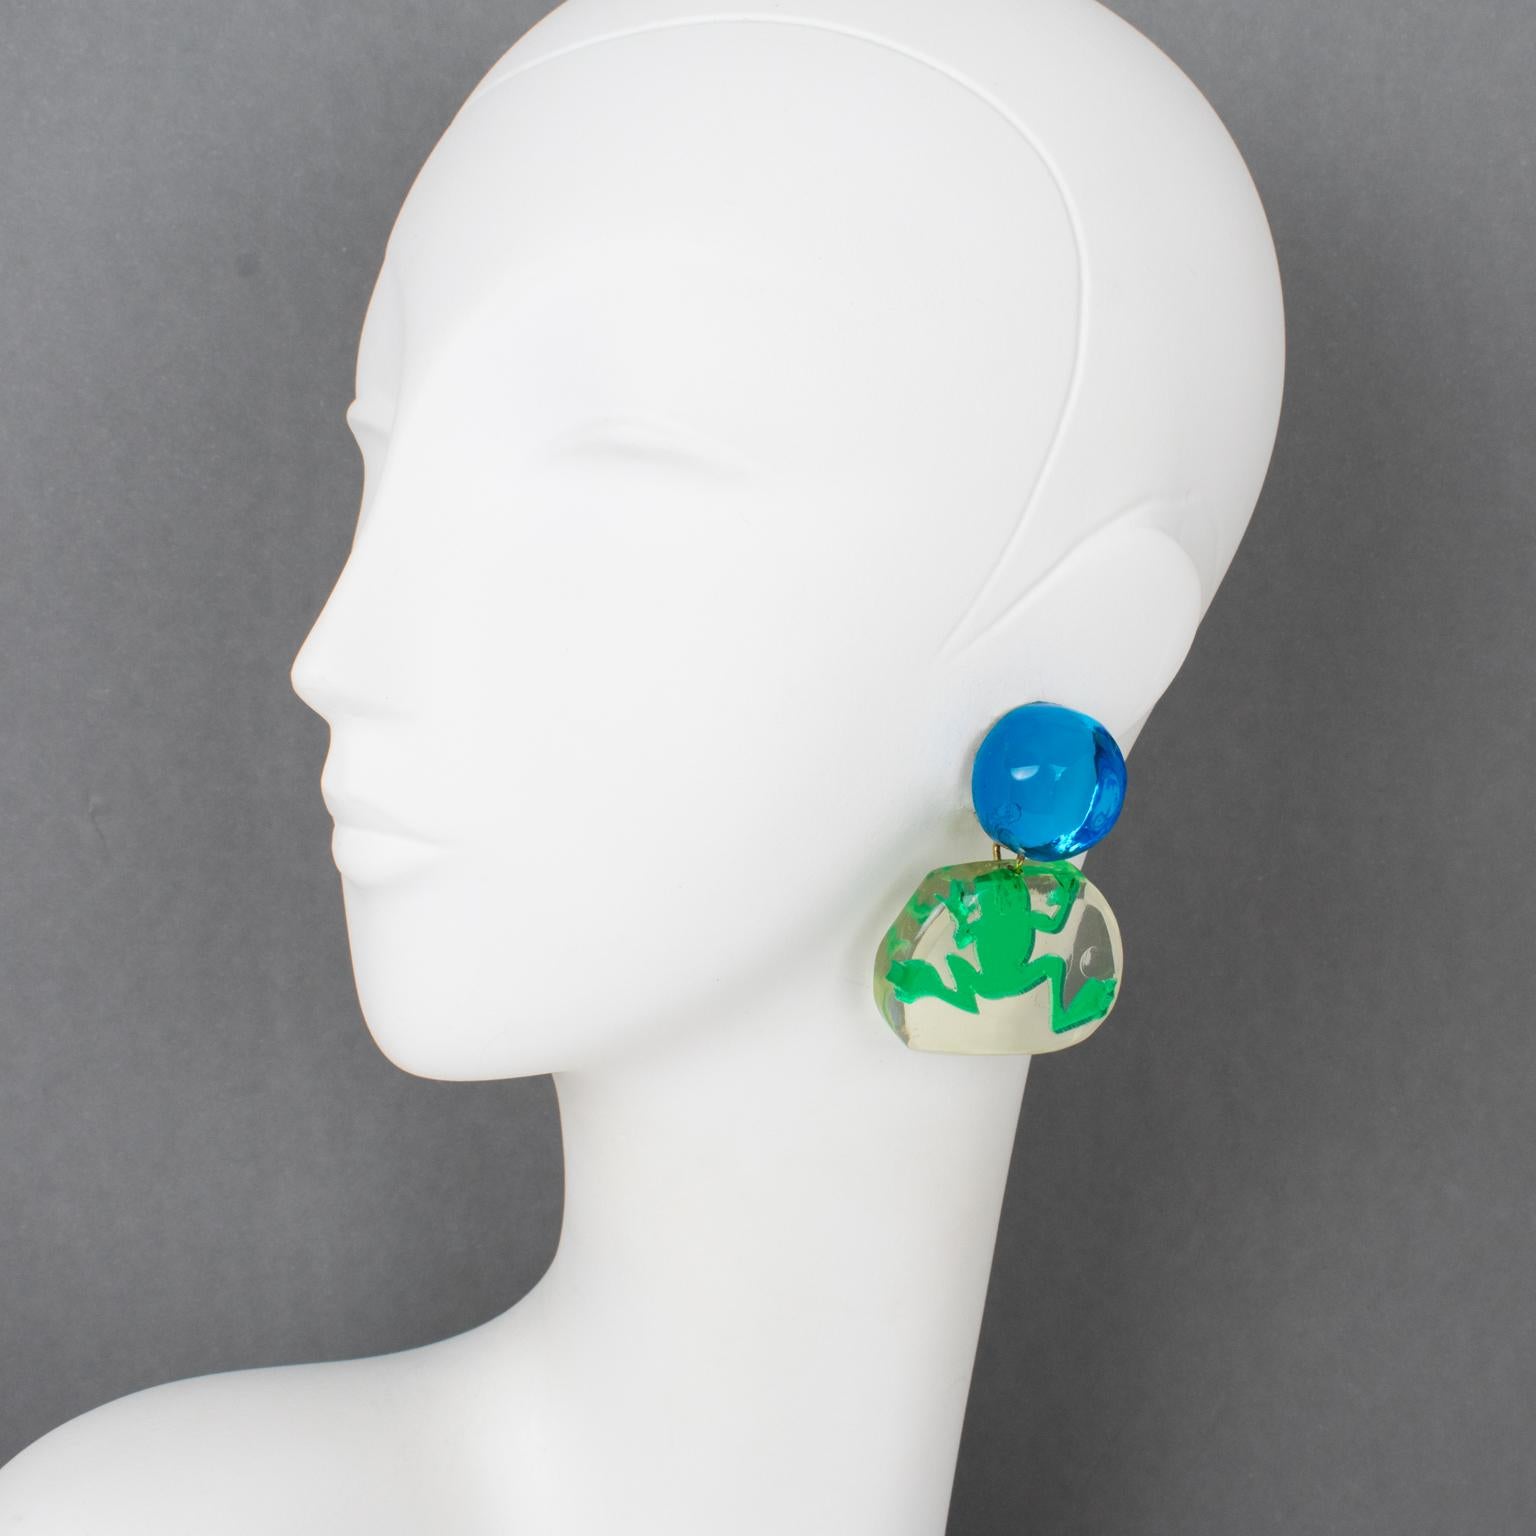 These are the cutest Lucite dangling clip-on earrings ever designed by Harriet Bauknight for Kaso in the 1980s. They feature a lagoon blue color Lucite dimensional bead fastening complemented with a rounded transparent pebble element in which a